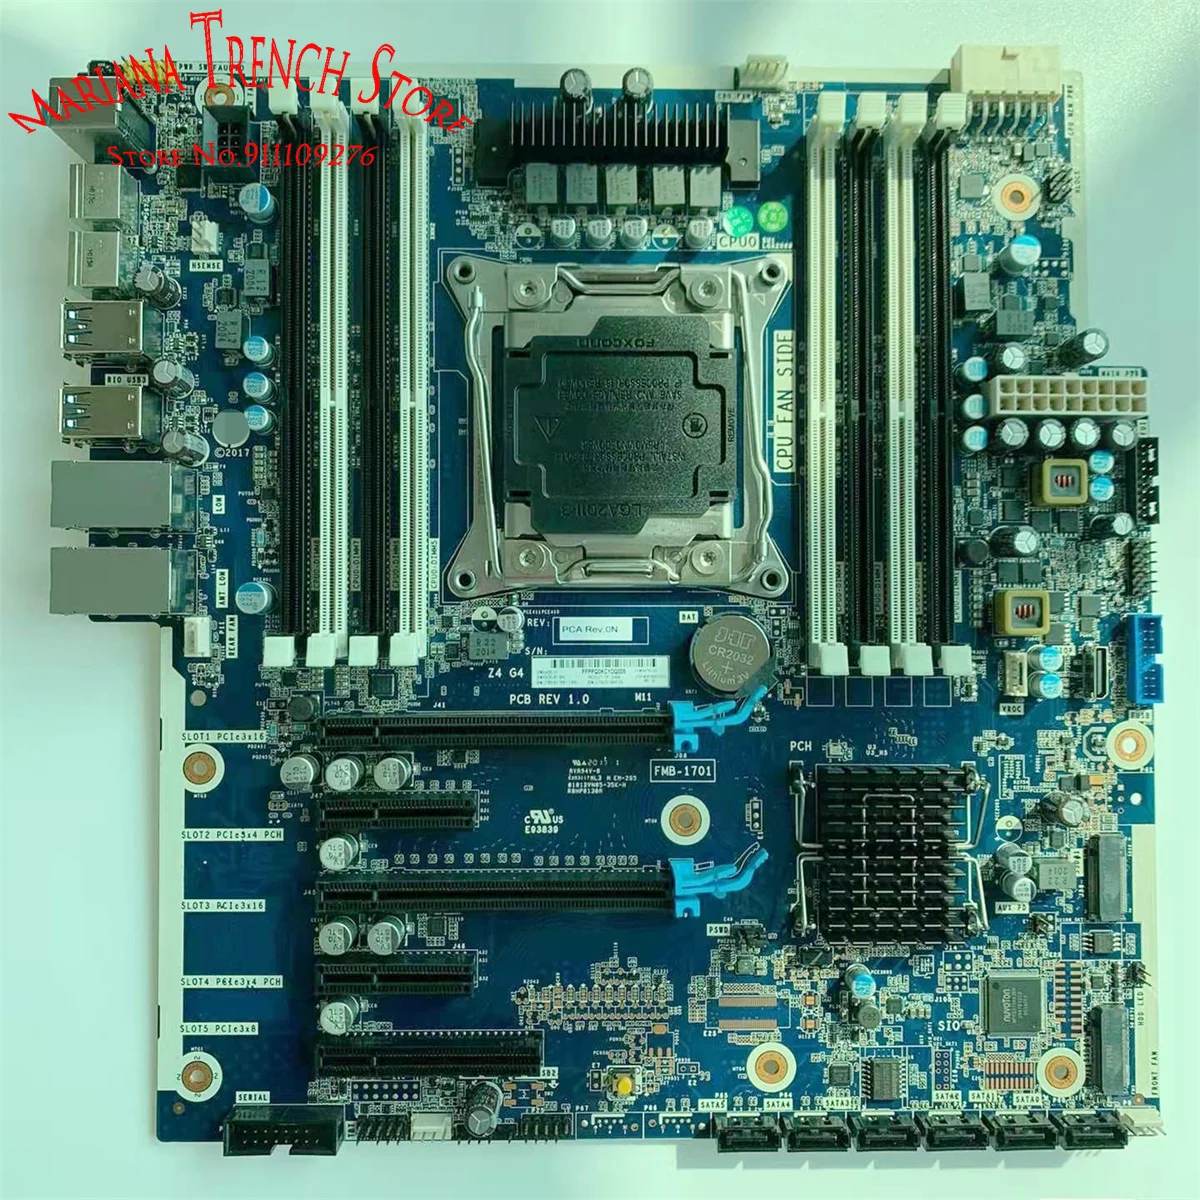 

Motherboard for HP Z4 G4 Desktop PC C422 Chipset Xeon W-2100 Family Processors,914285-001 844783-001